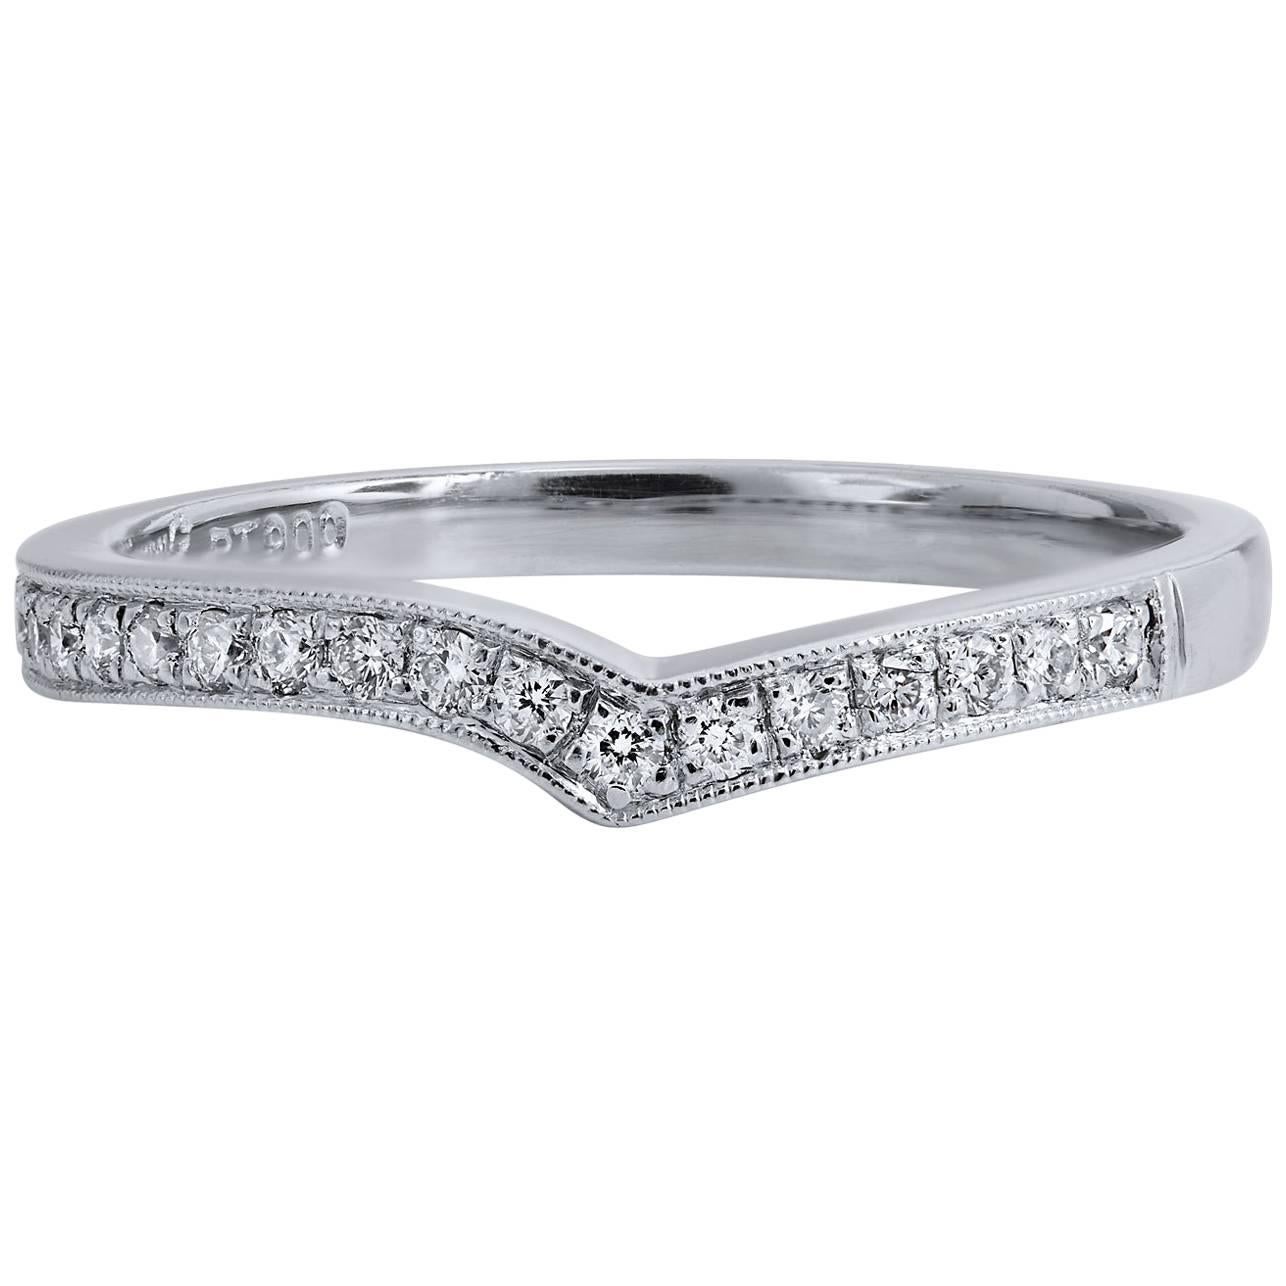 0.16 Carat Pave Diamond Free-Form Band Ring For Sale